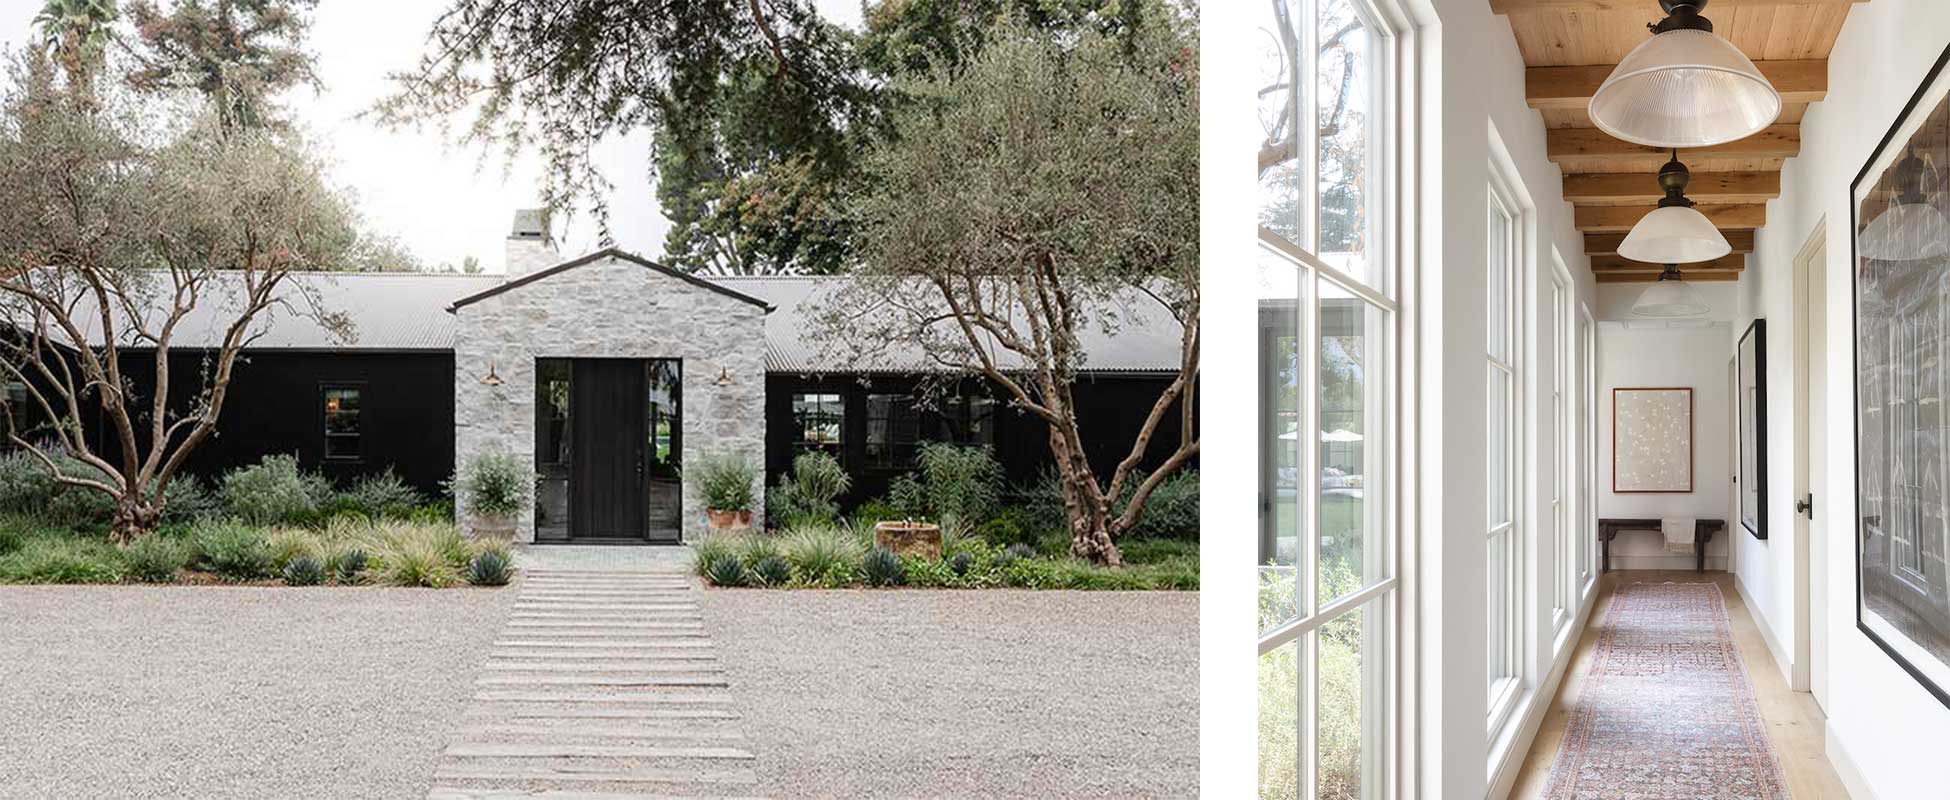 Amber Lewis’s Belgian farmhouse-style home in Los Angeles, featuring Marvin Signature Ultimate windows and doors.